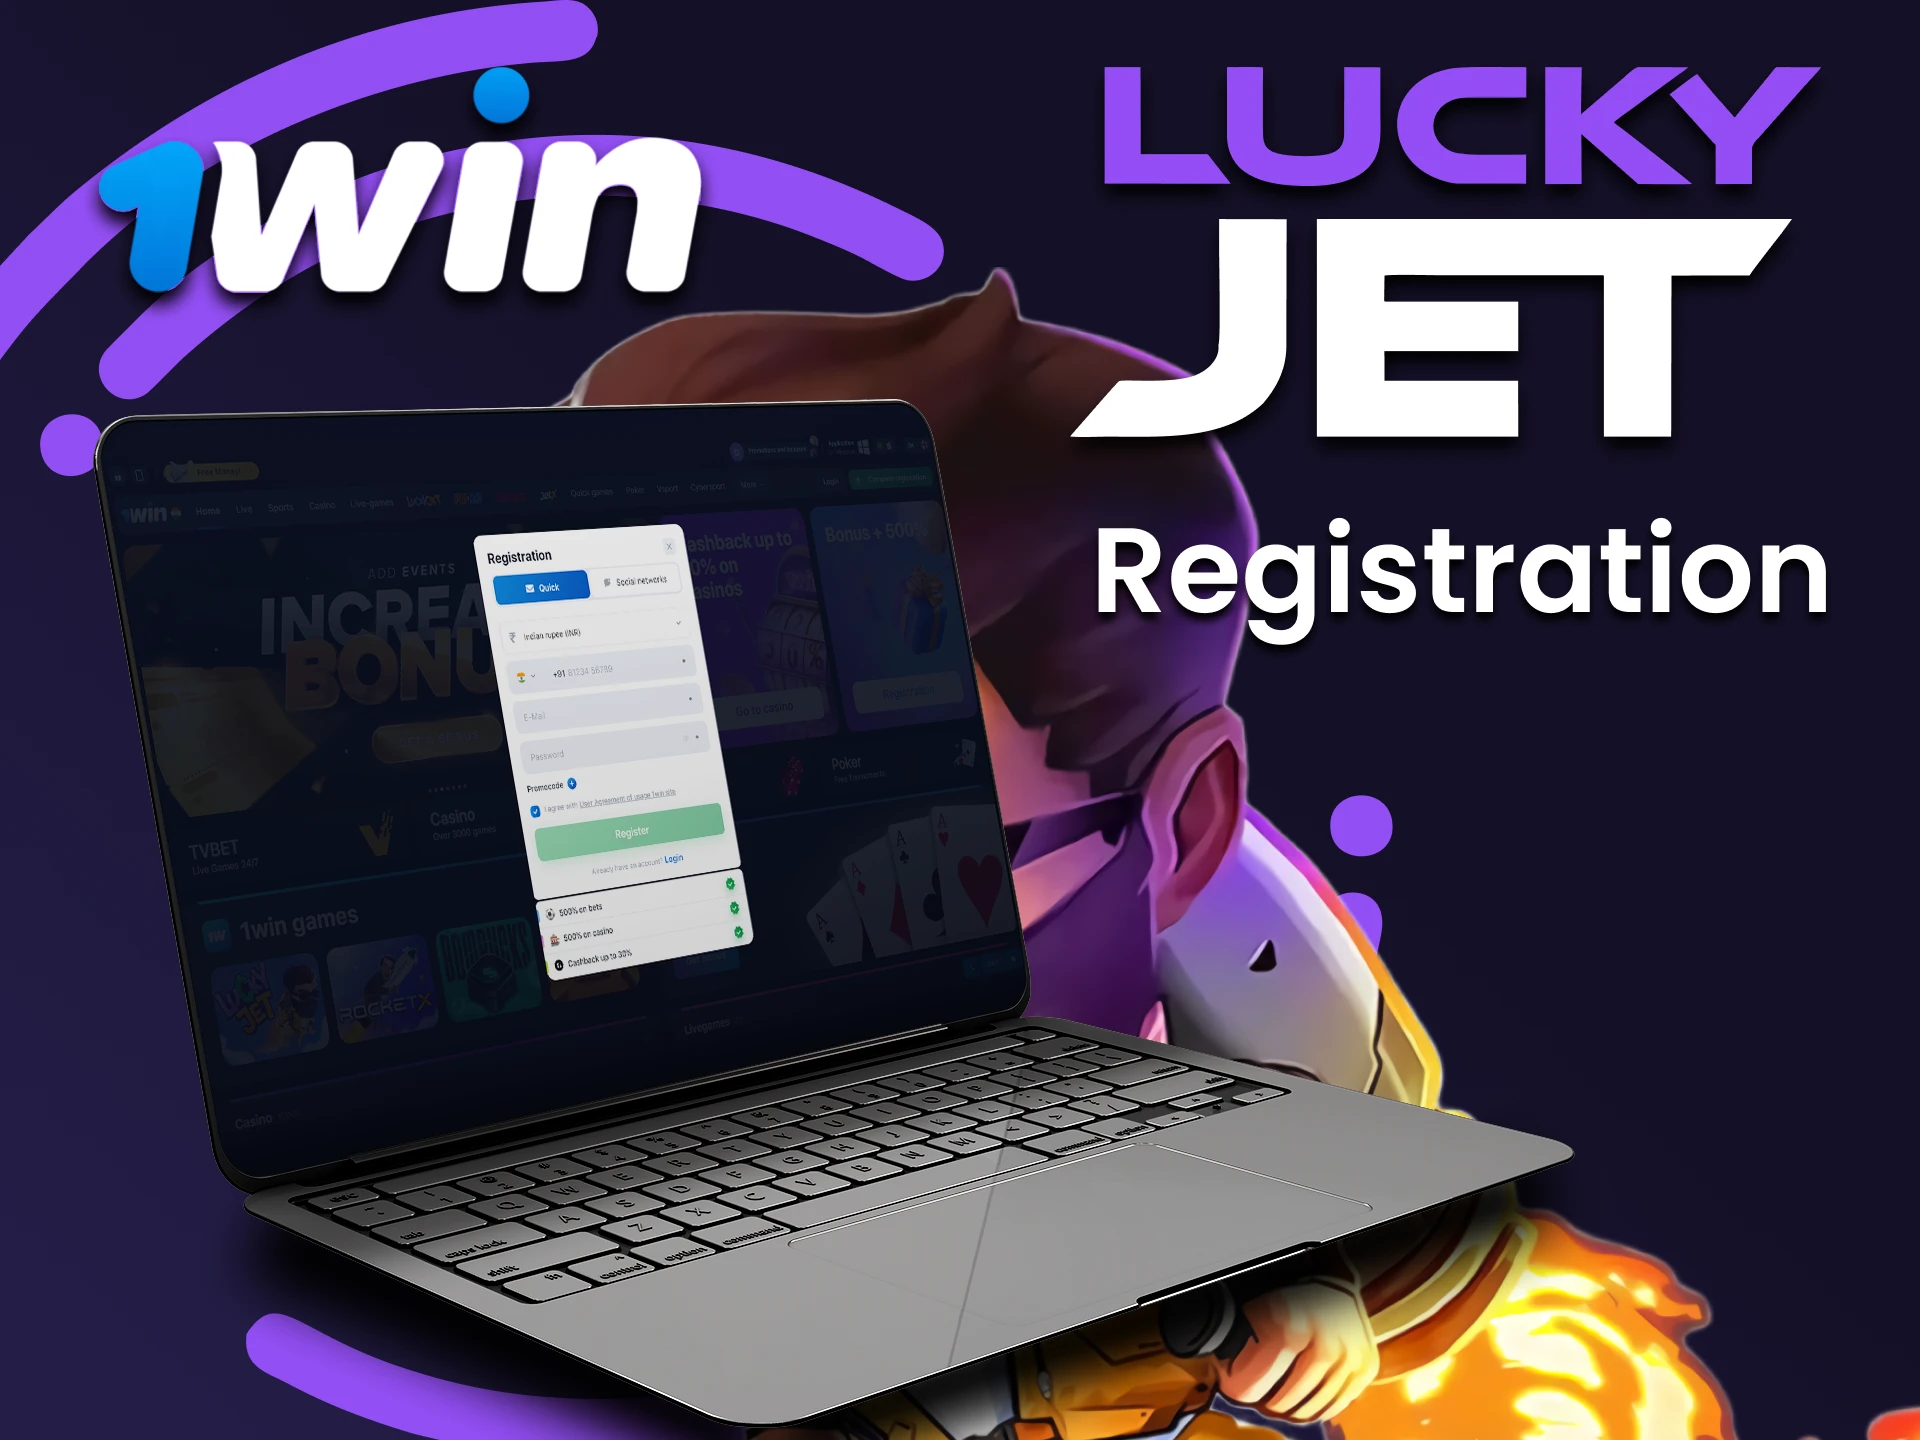 Register on 1win to play Lucky Jet.